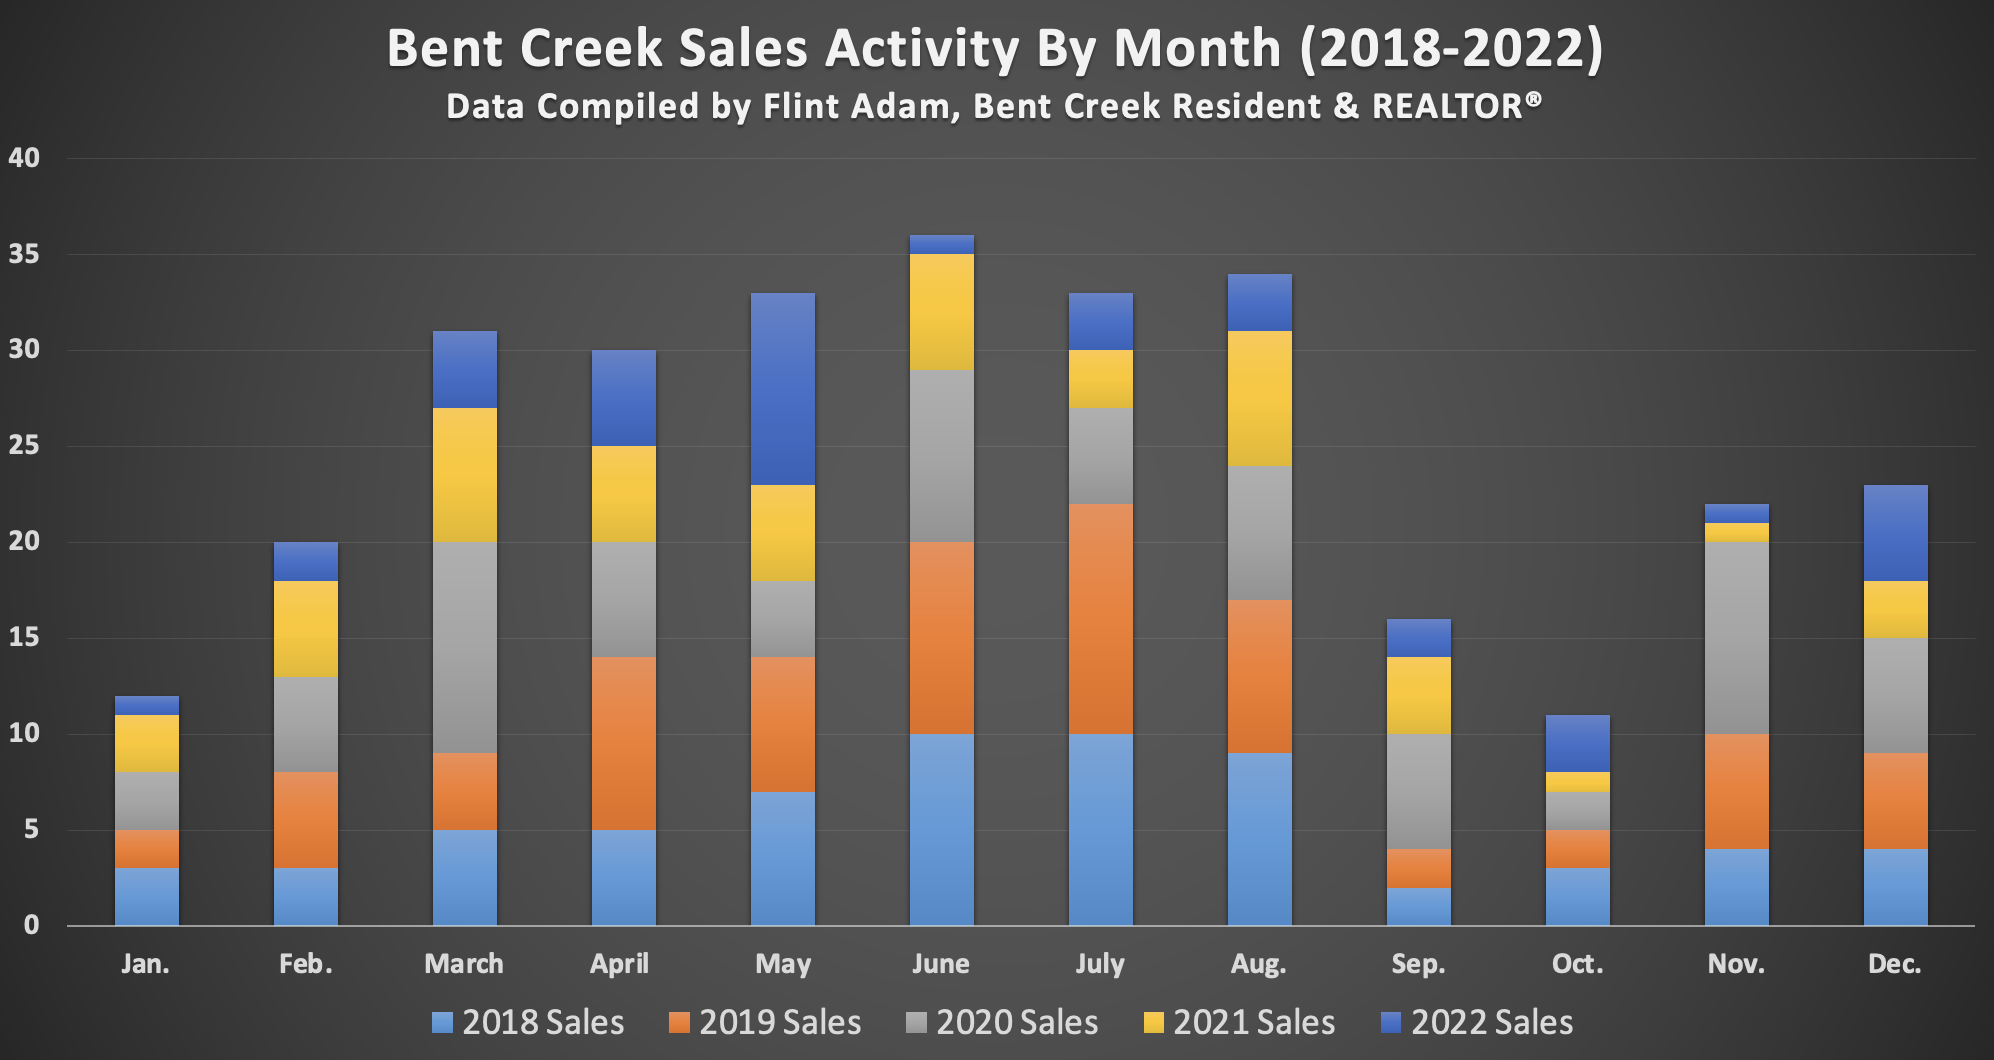 Bent Creek Home Sales Activity By Month - 2018-2022